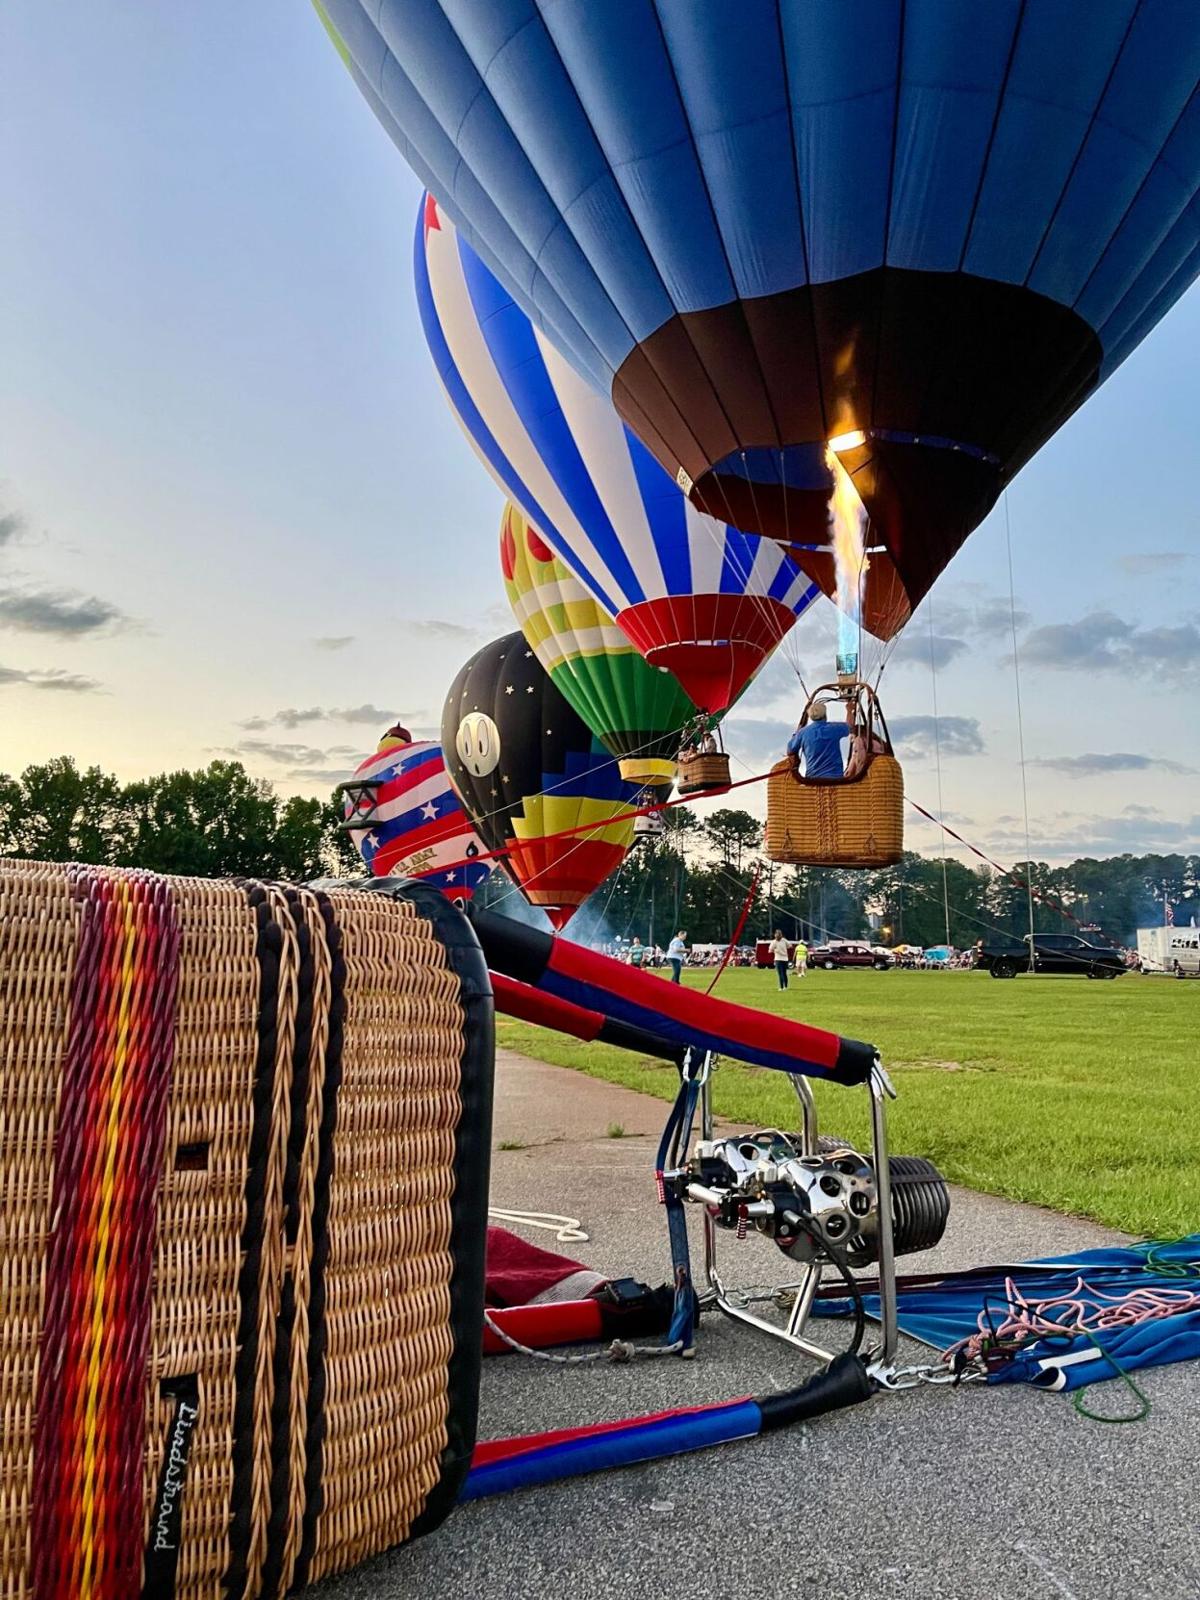 PHOTOS Scenes from the 2022 Hot Air Balloon Festival